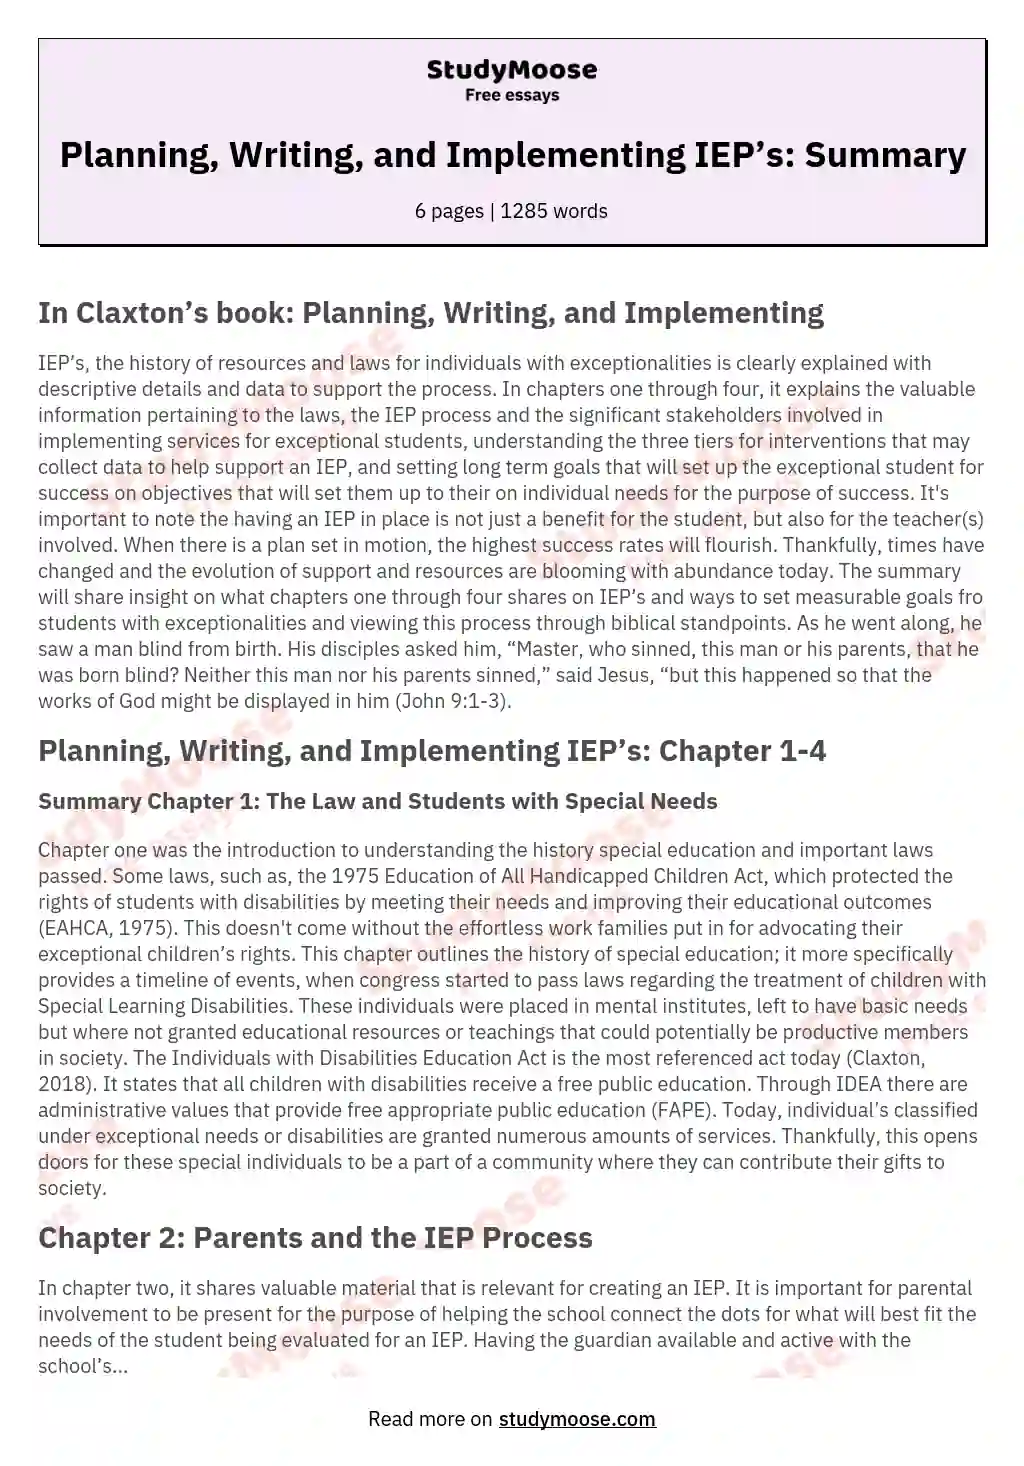 Planning, Writing, and Implementing IEP’s: Summary essay